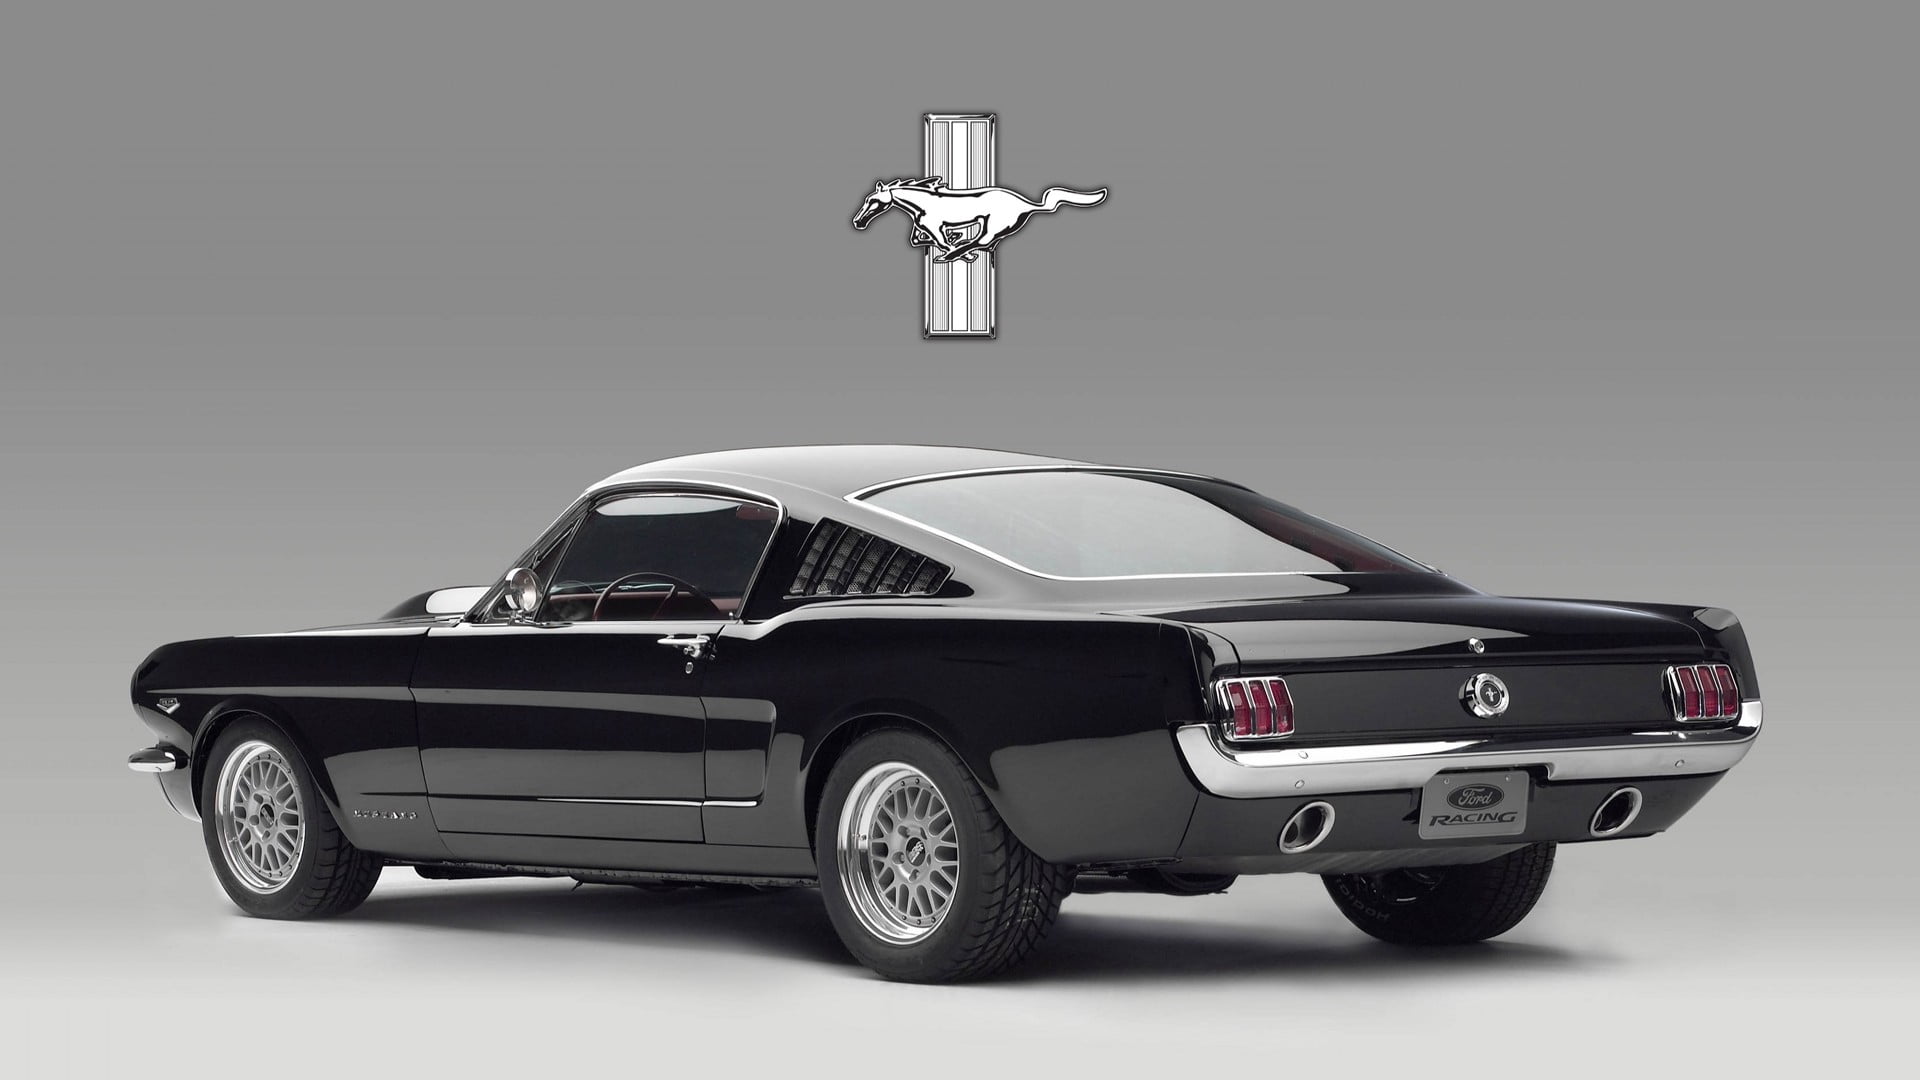 Black Ford Mustang Coupe Hd Wallpaper Wallpaper Flare